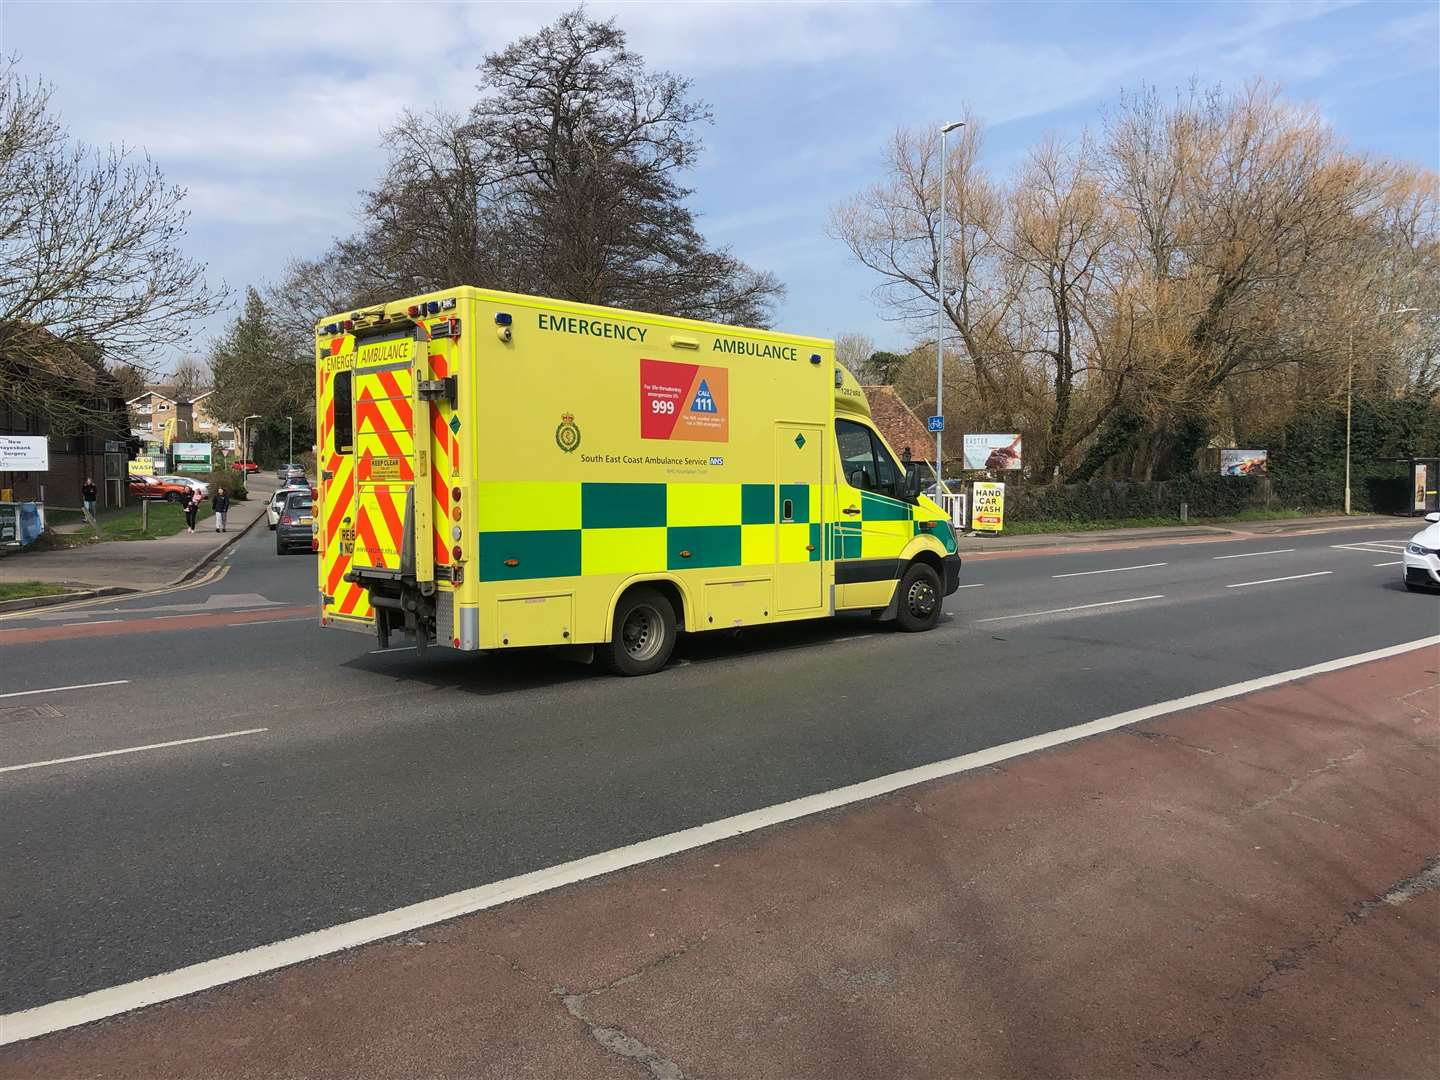 Paramedics treated the cyclist for injuries